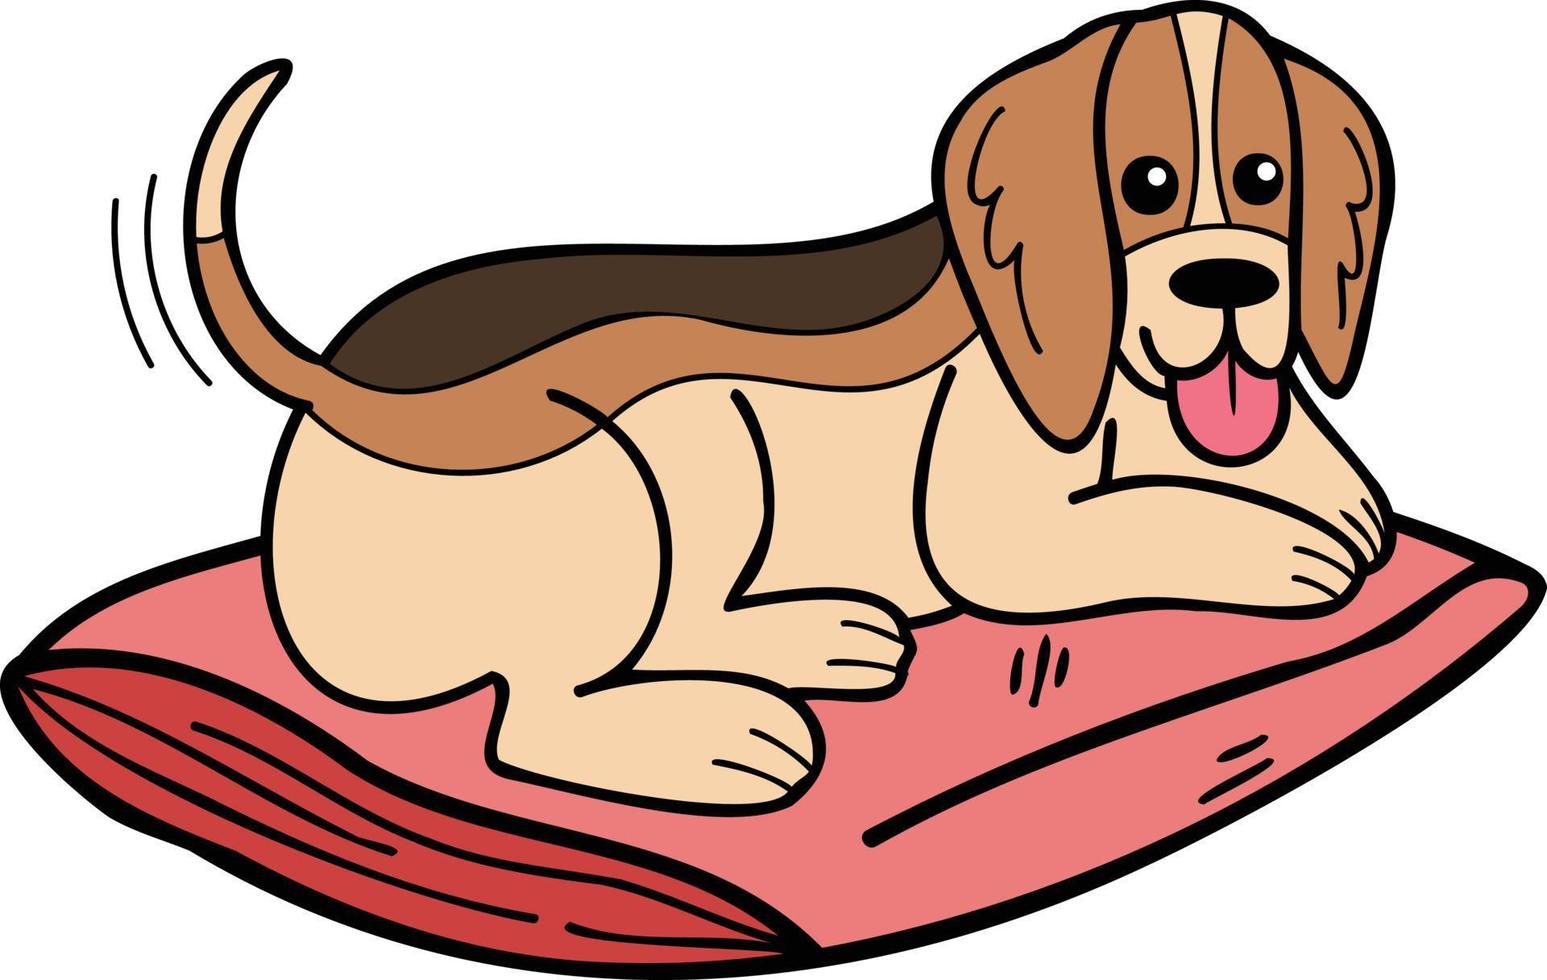 Hand Drawn sleeping Beagle Dog illustration in doodle style vector